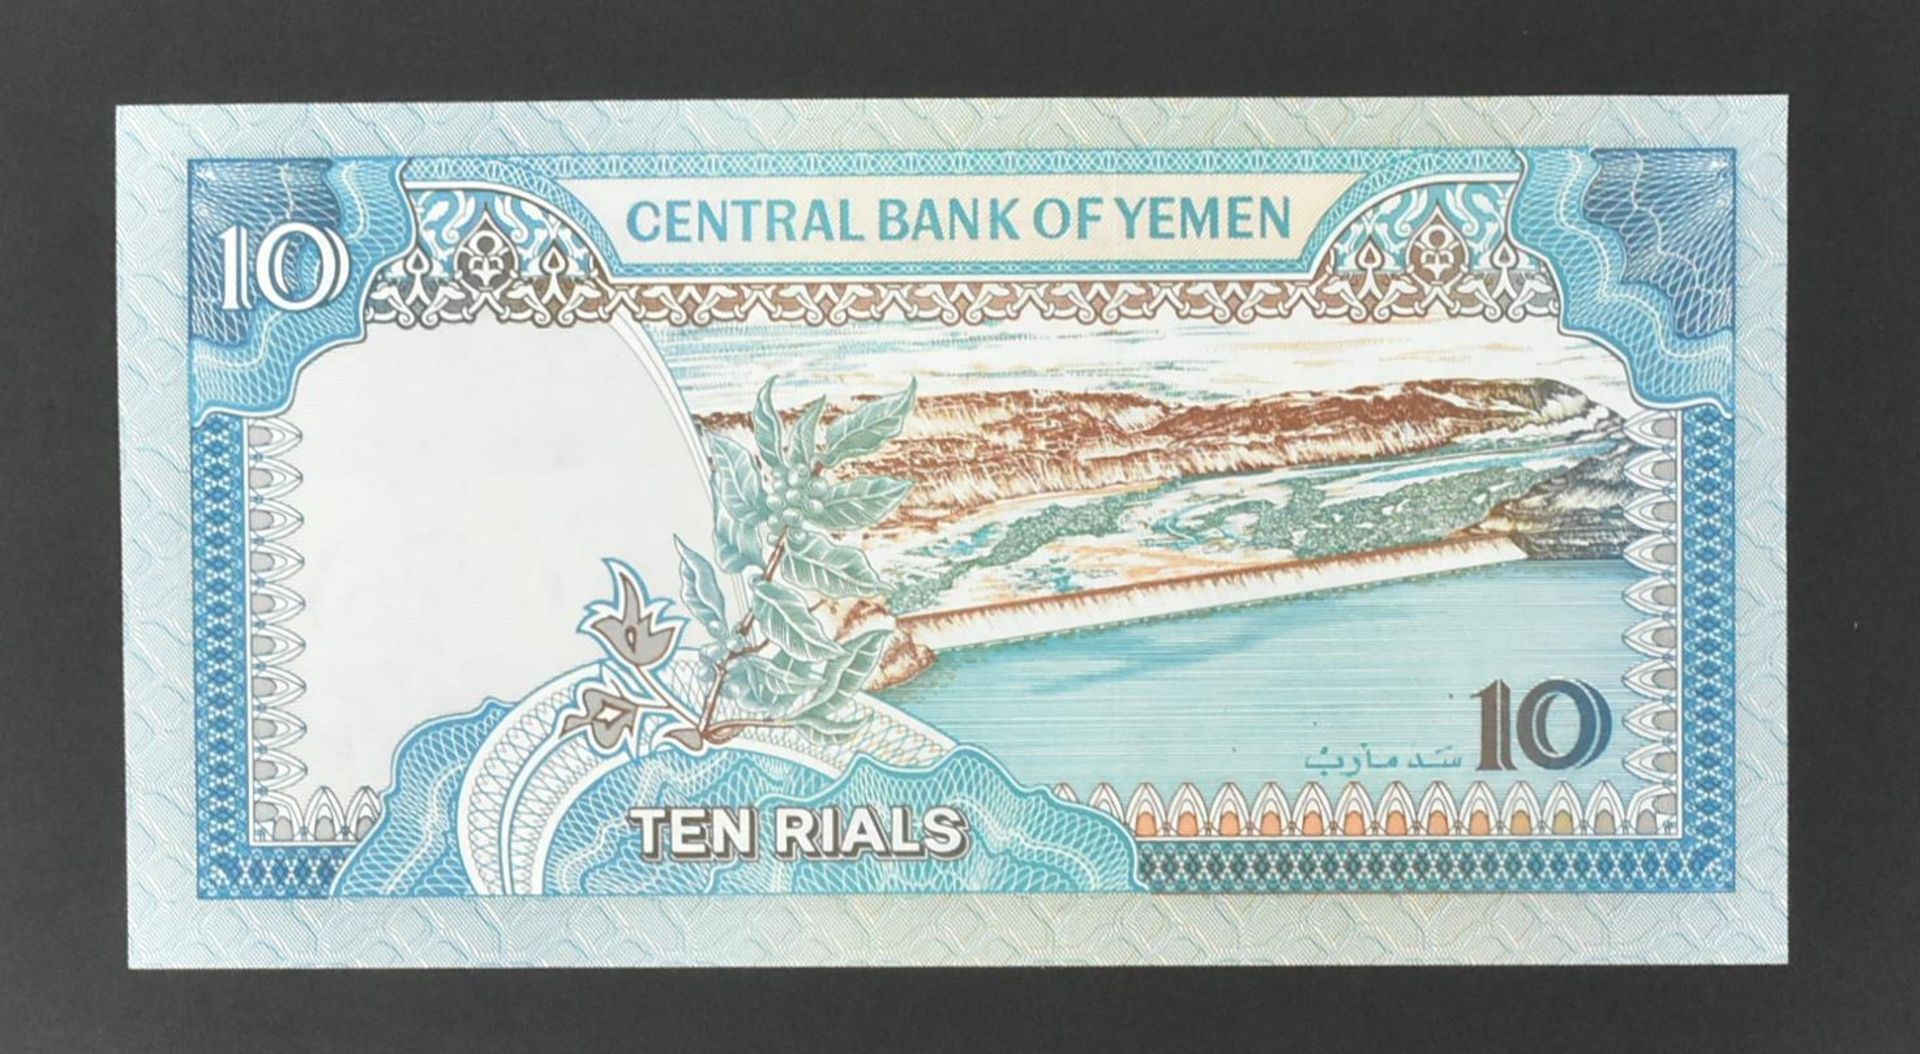 COLLECTION OF INTERNATIONAL UNCIRCULATED BANK NOTES - Image 26 of 36